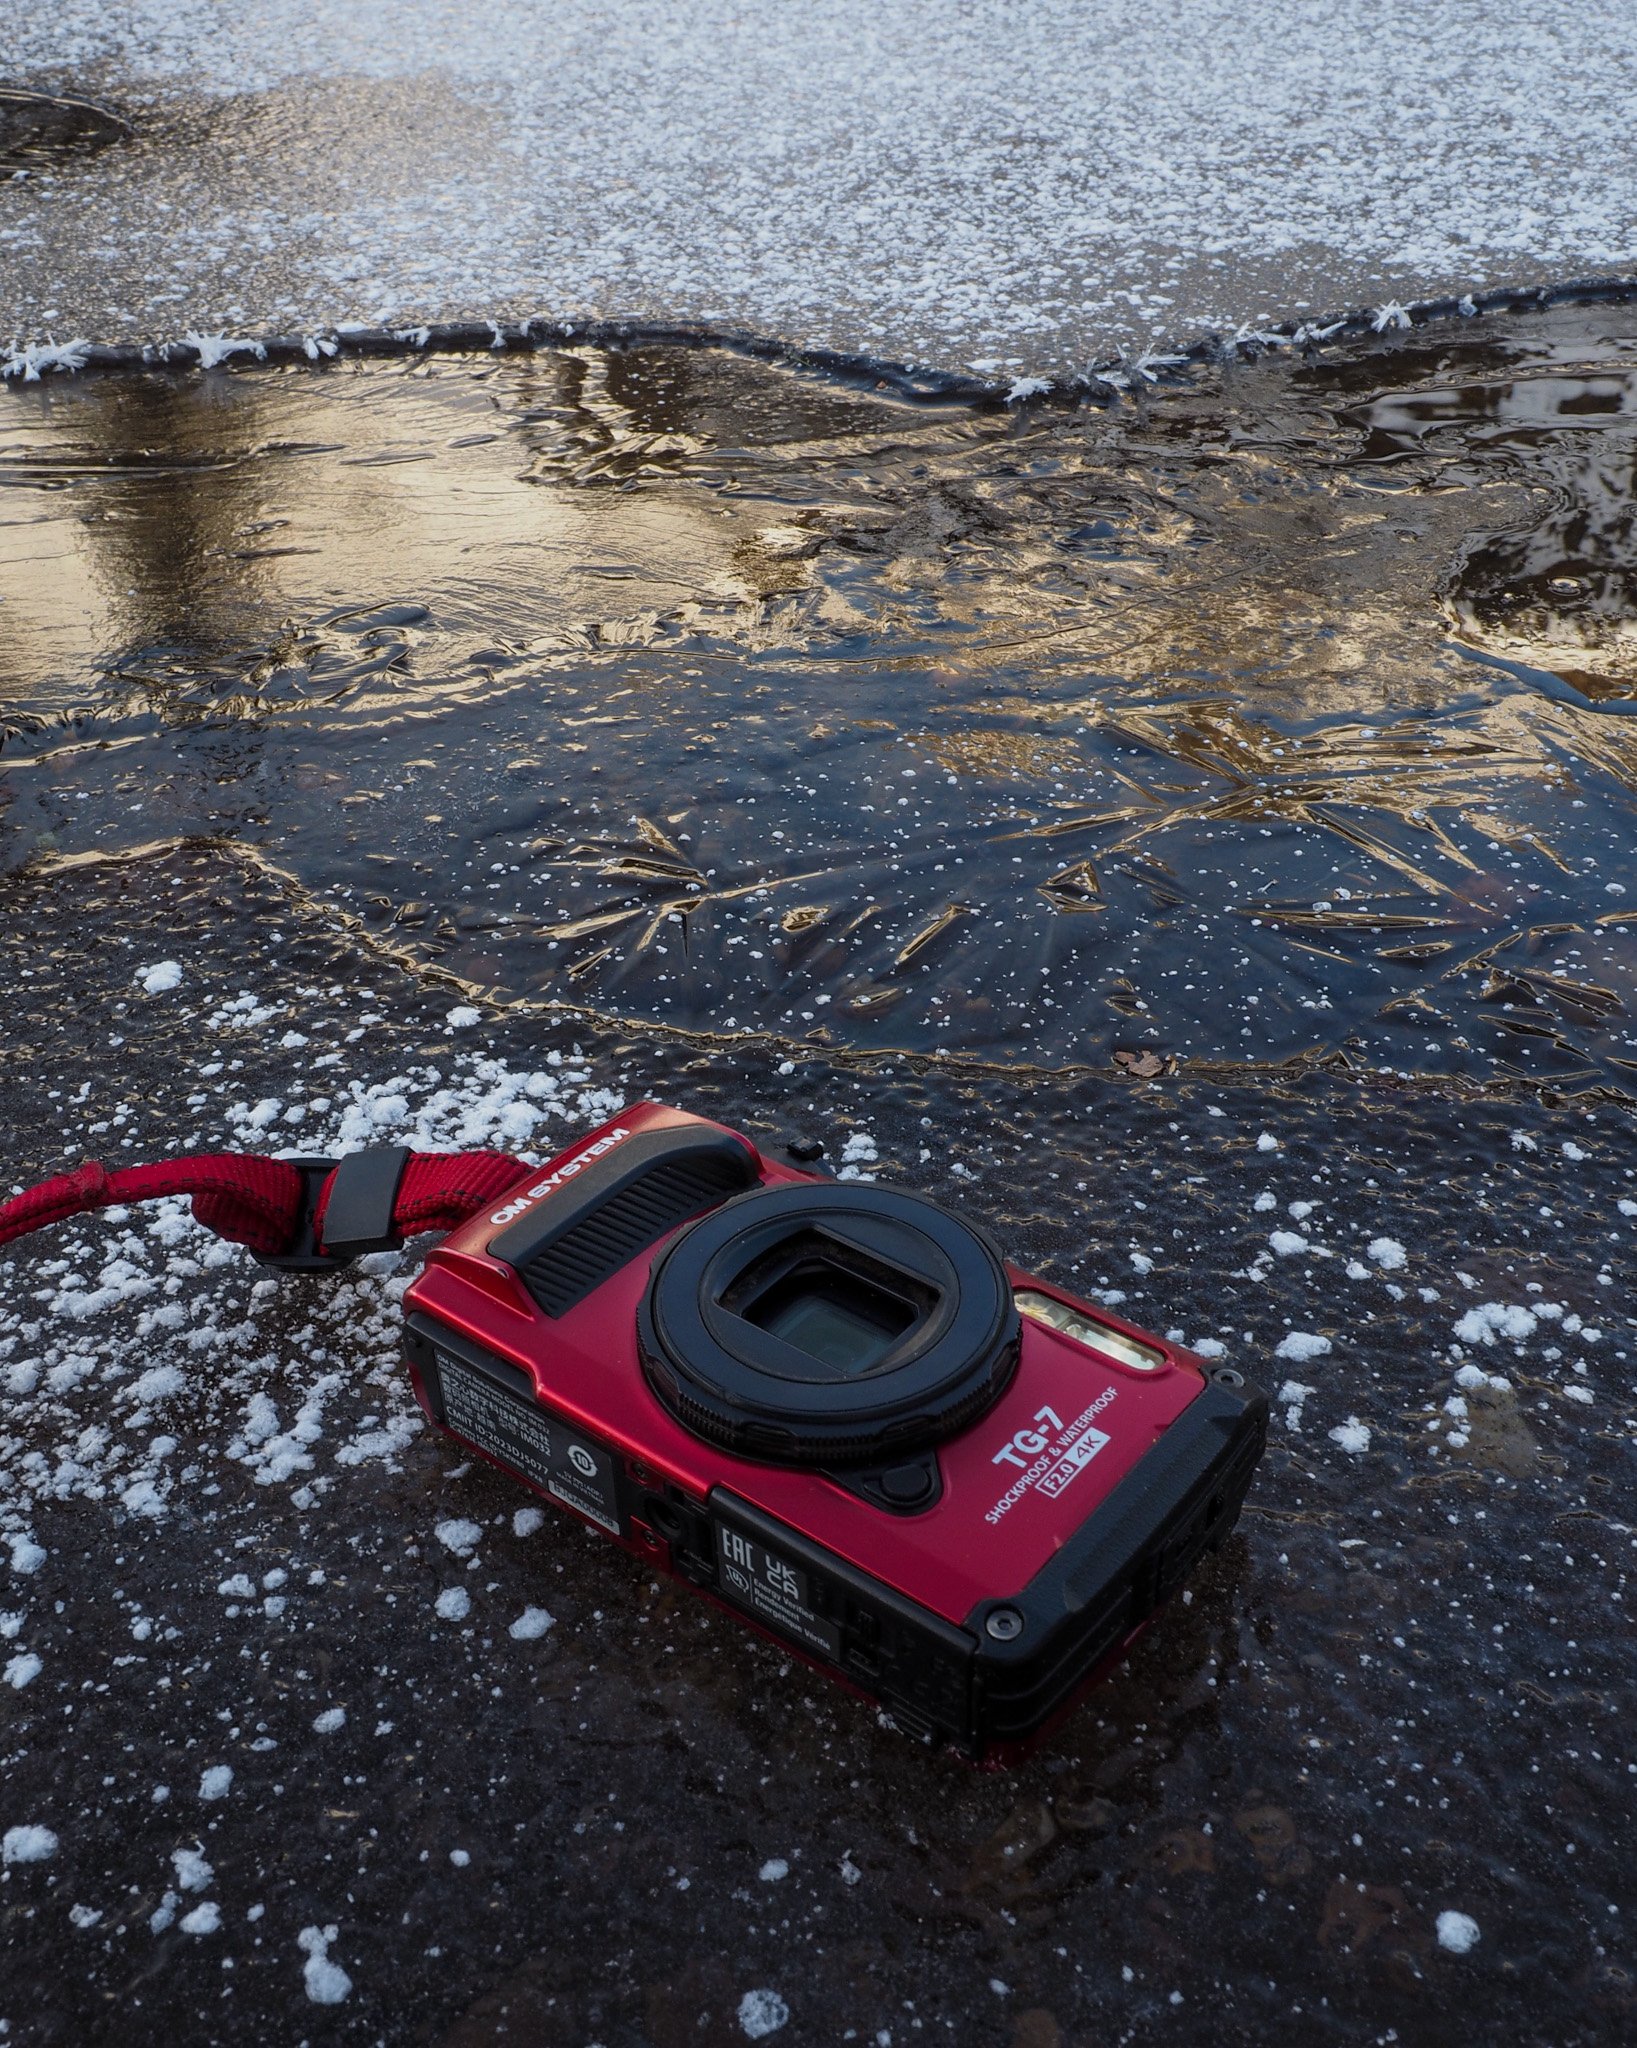 OM System TG-7 Rugged Camera Review